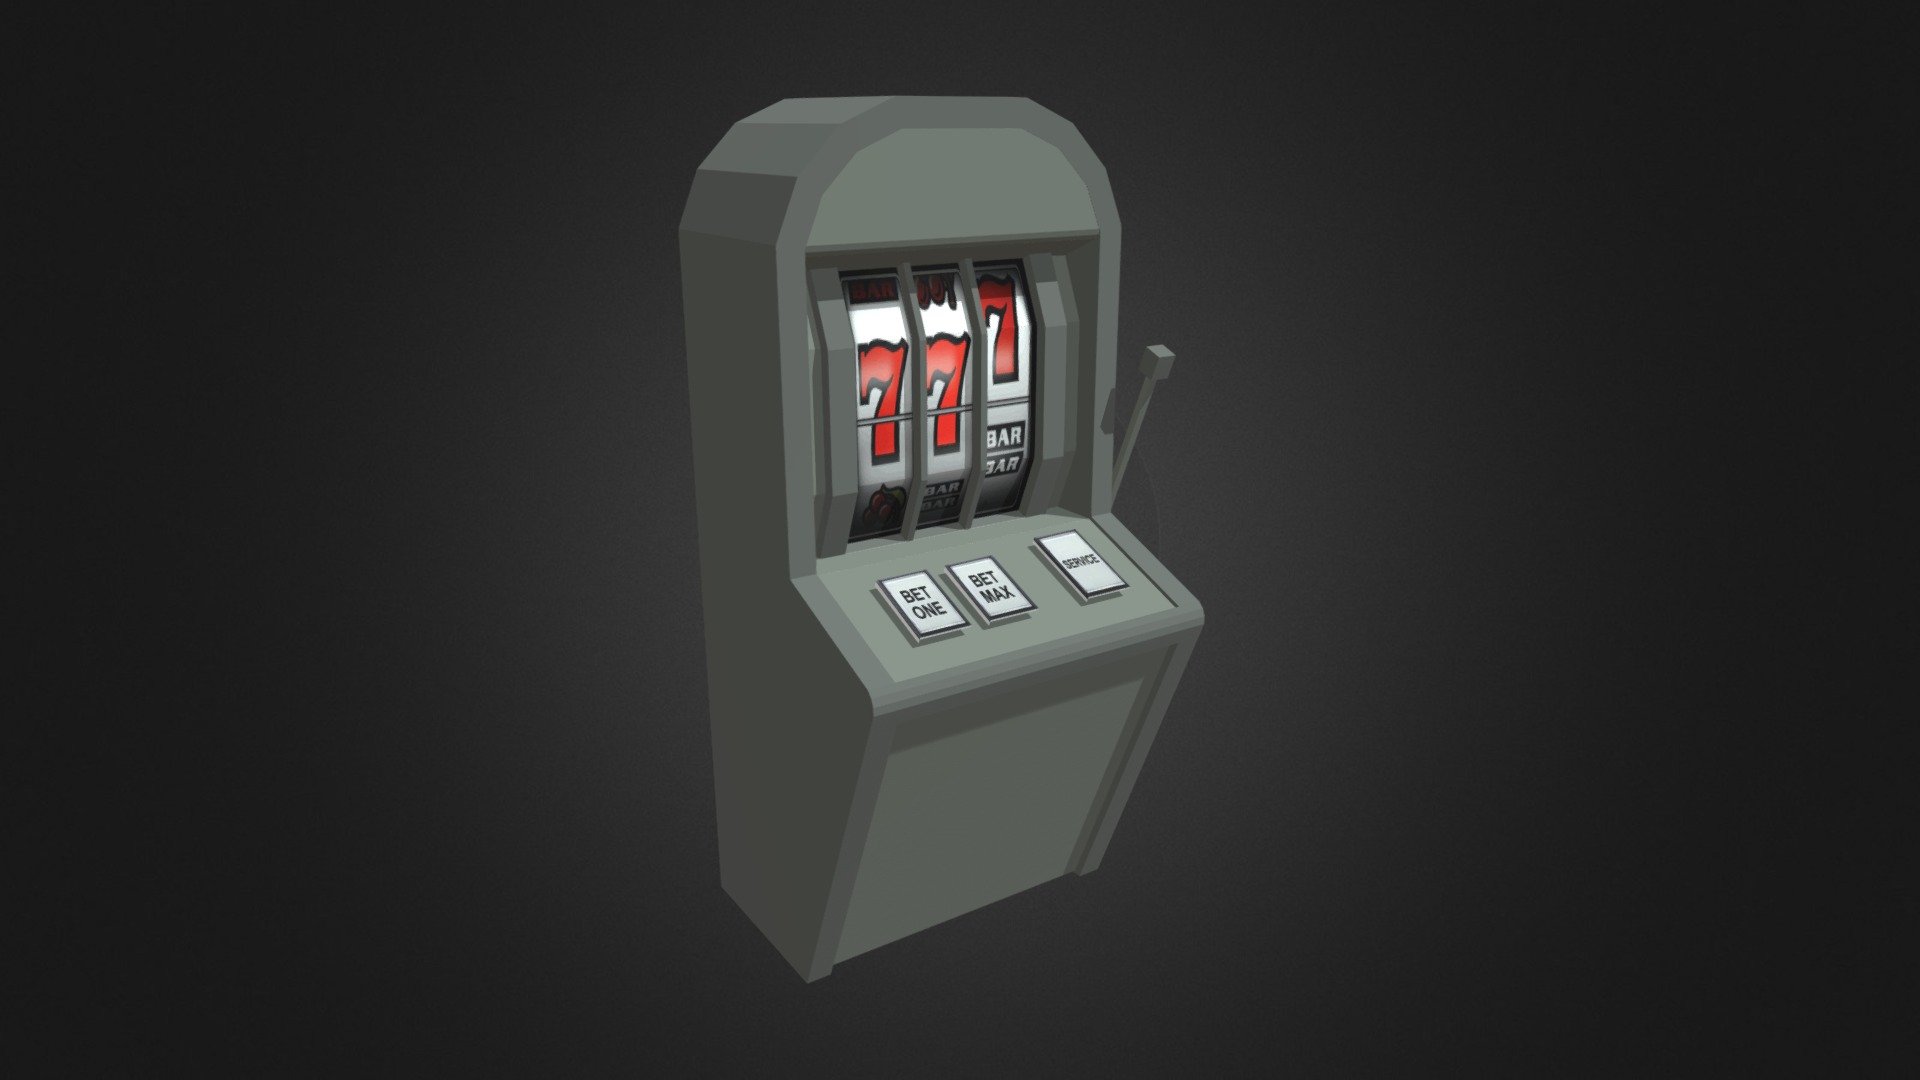 Slot machine, created for minecraft and usable in game. 
if you have any question –&gt; nathan.mscll@gmail.com - Slot machine for minecraft - 3D model by Nathan_mscll (@Sinox_38) 3d model